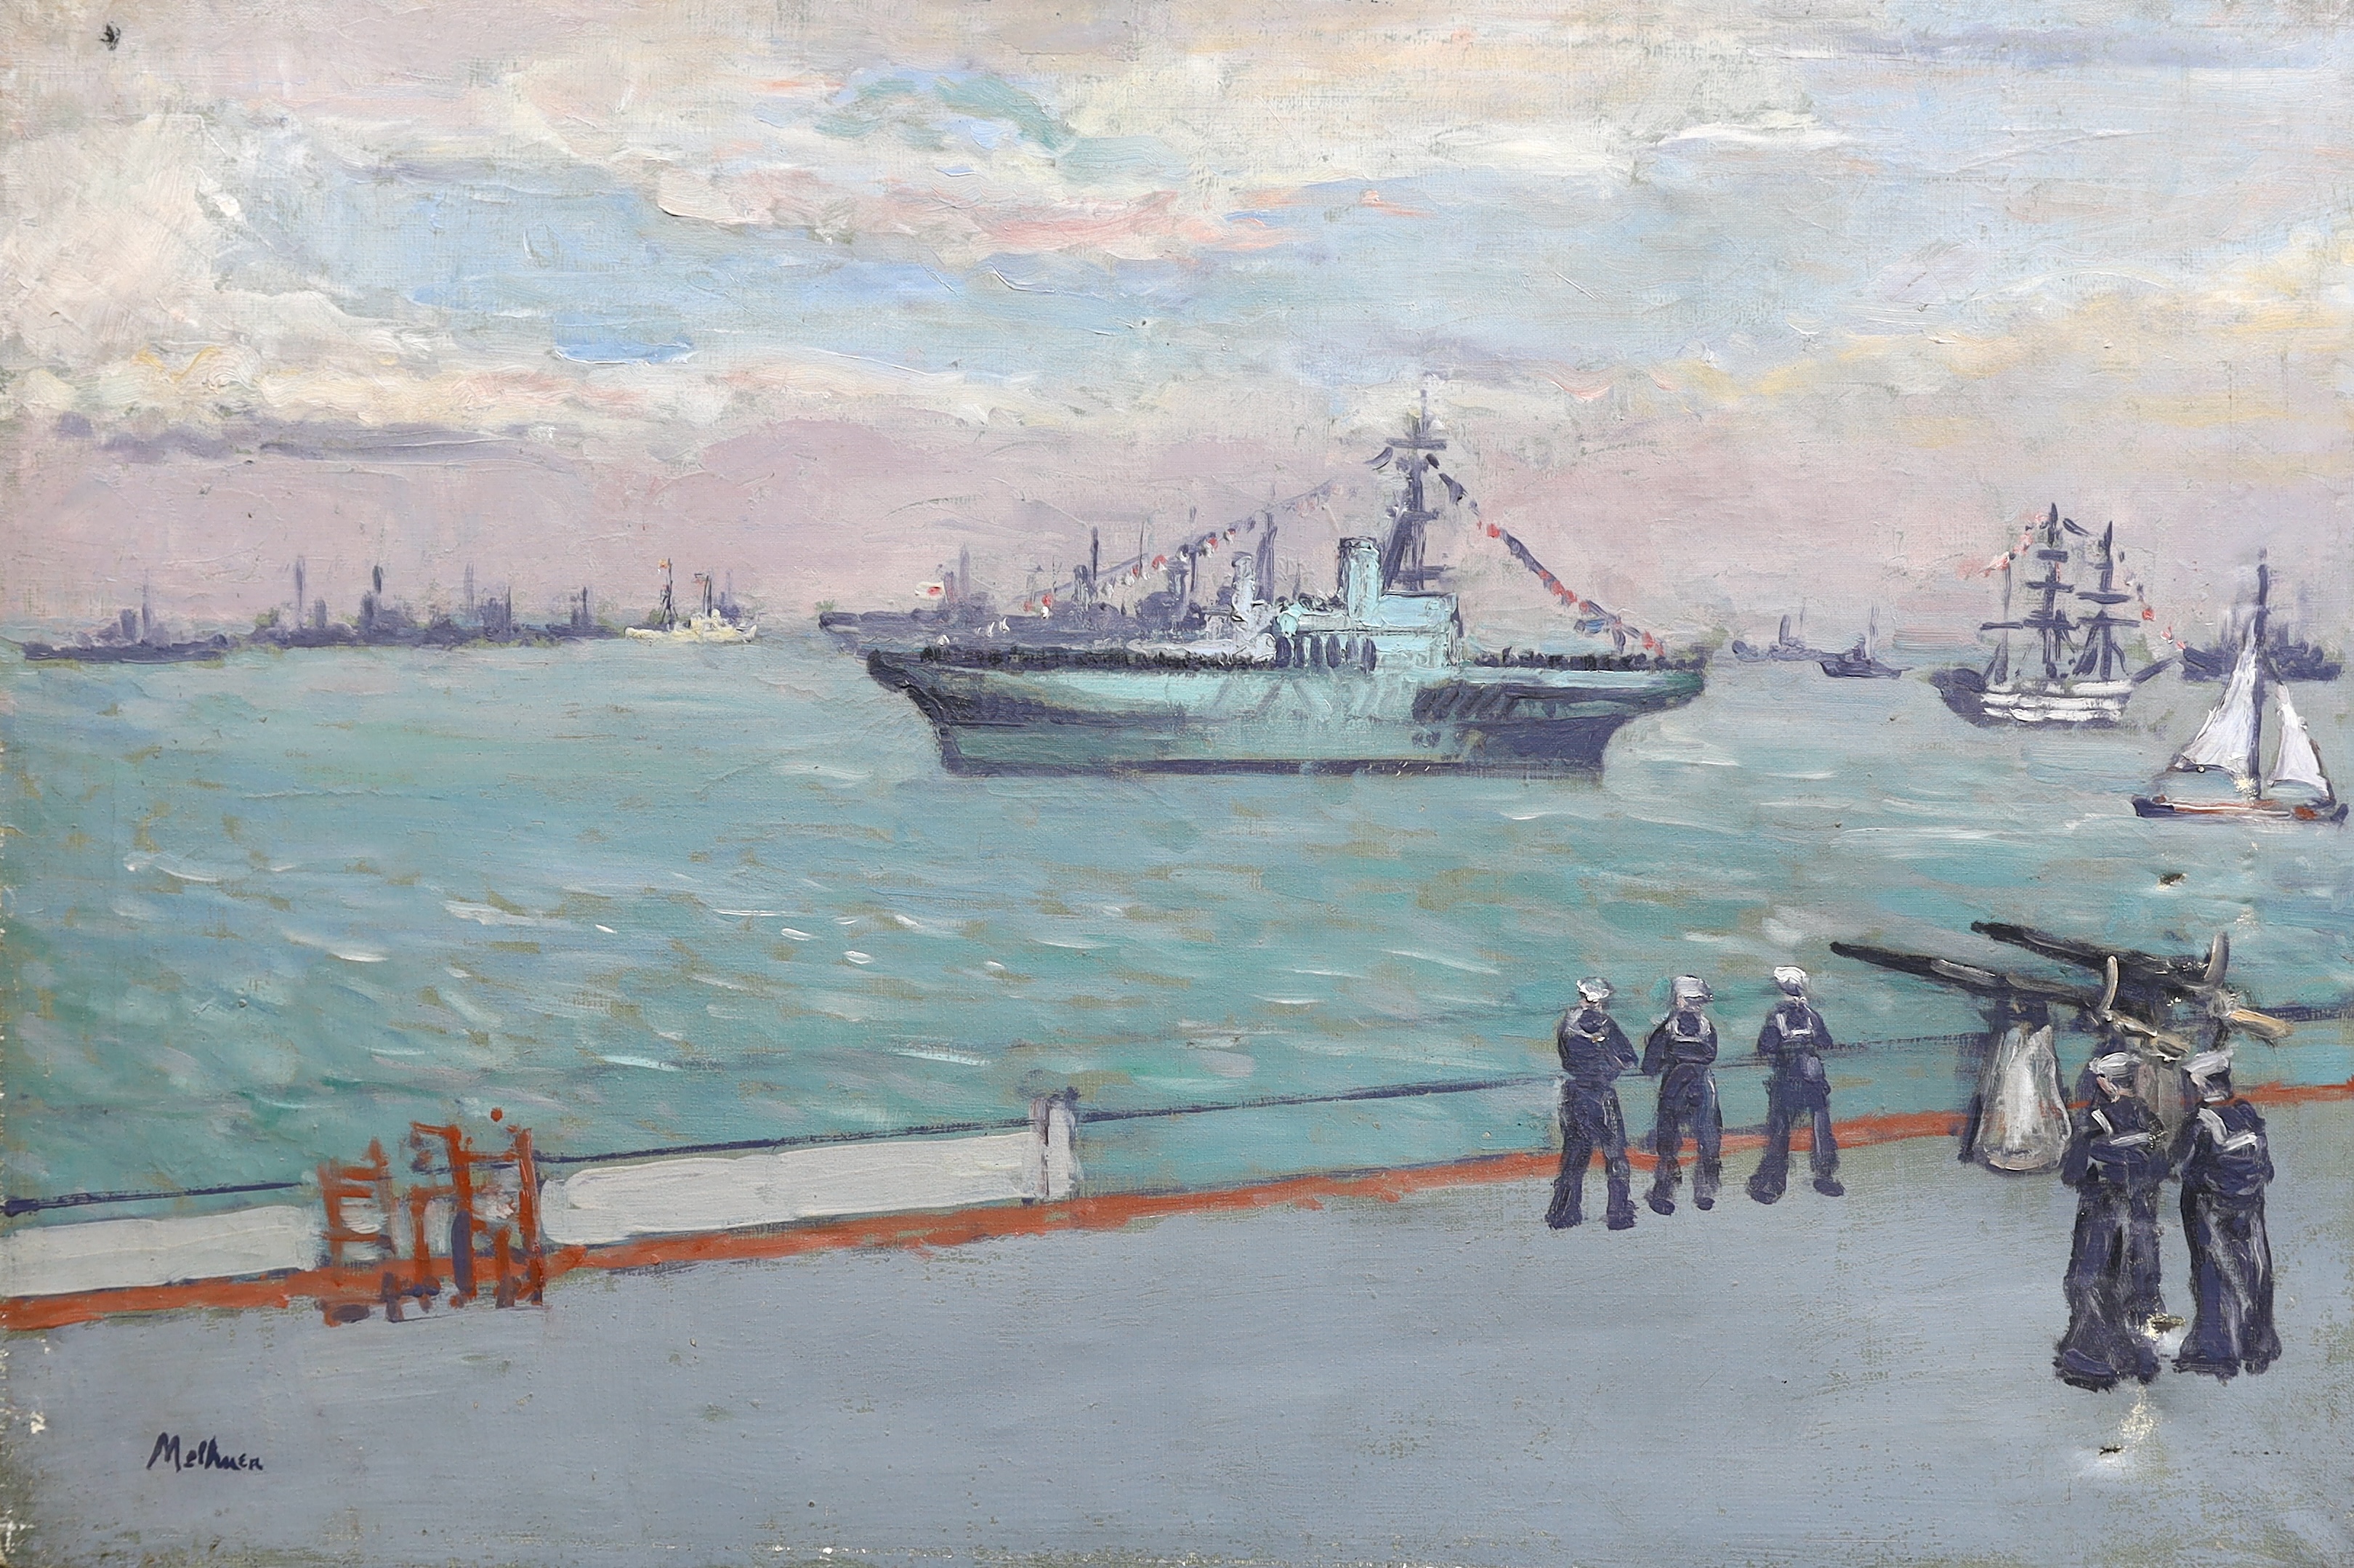 Lord Methuen (English, 1886-1974), Spithead Review 'The Surprise' with HM The Queen on board, coming into view before inspecting line of aircraft carriers', oil on canvas, 51 x 76cm